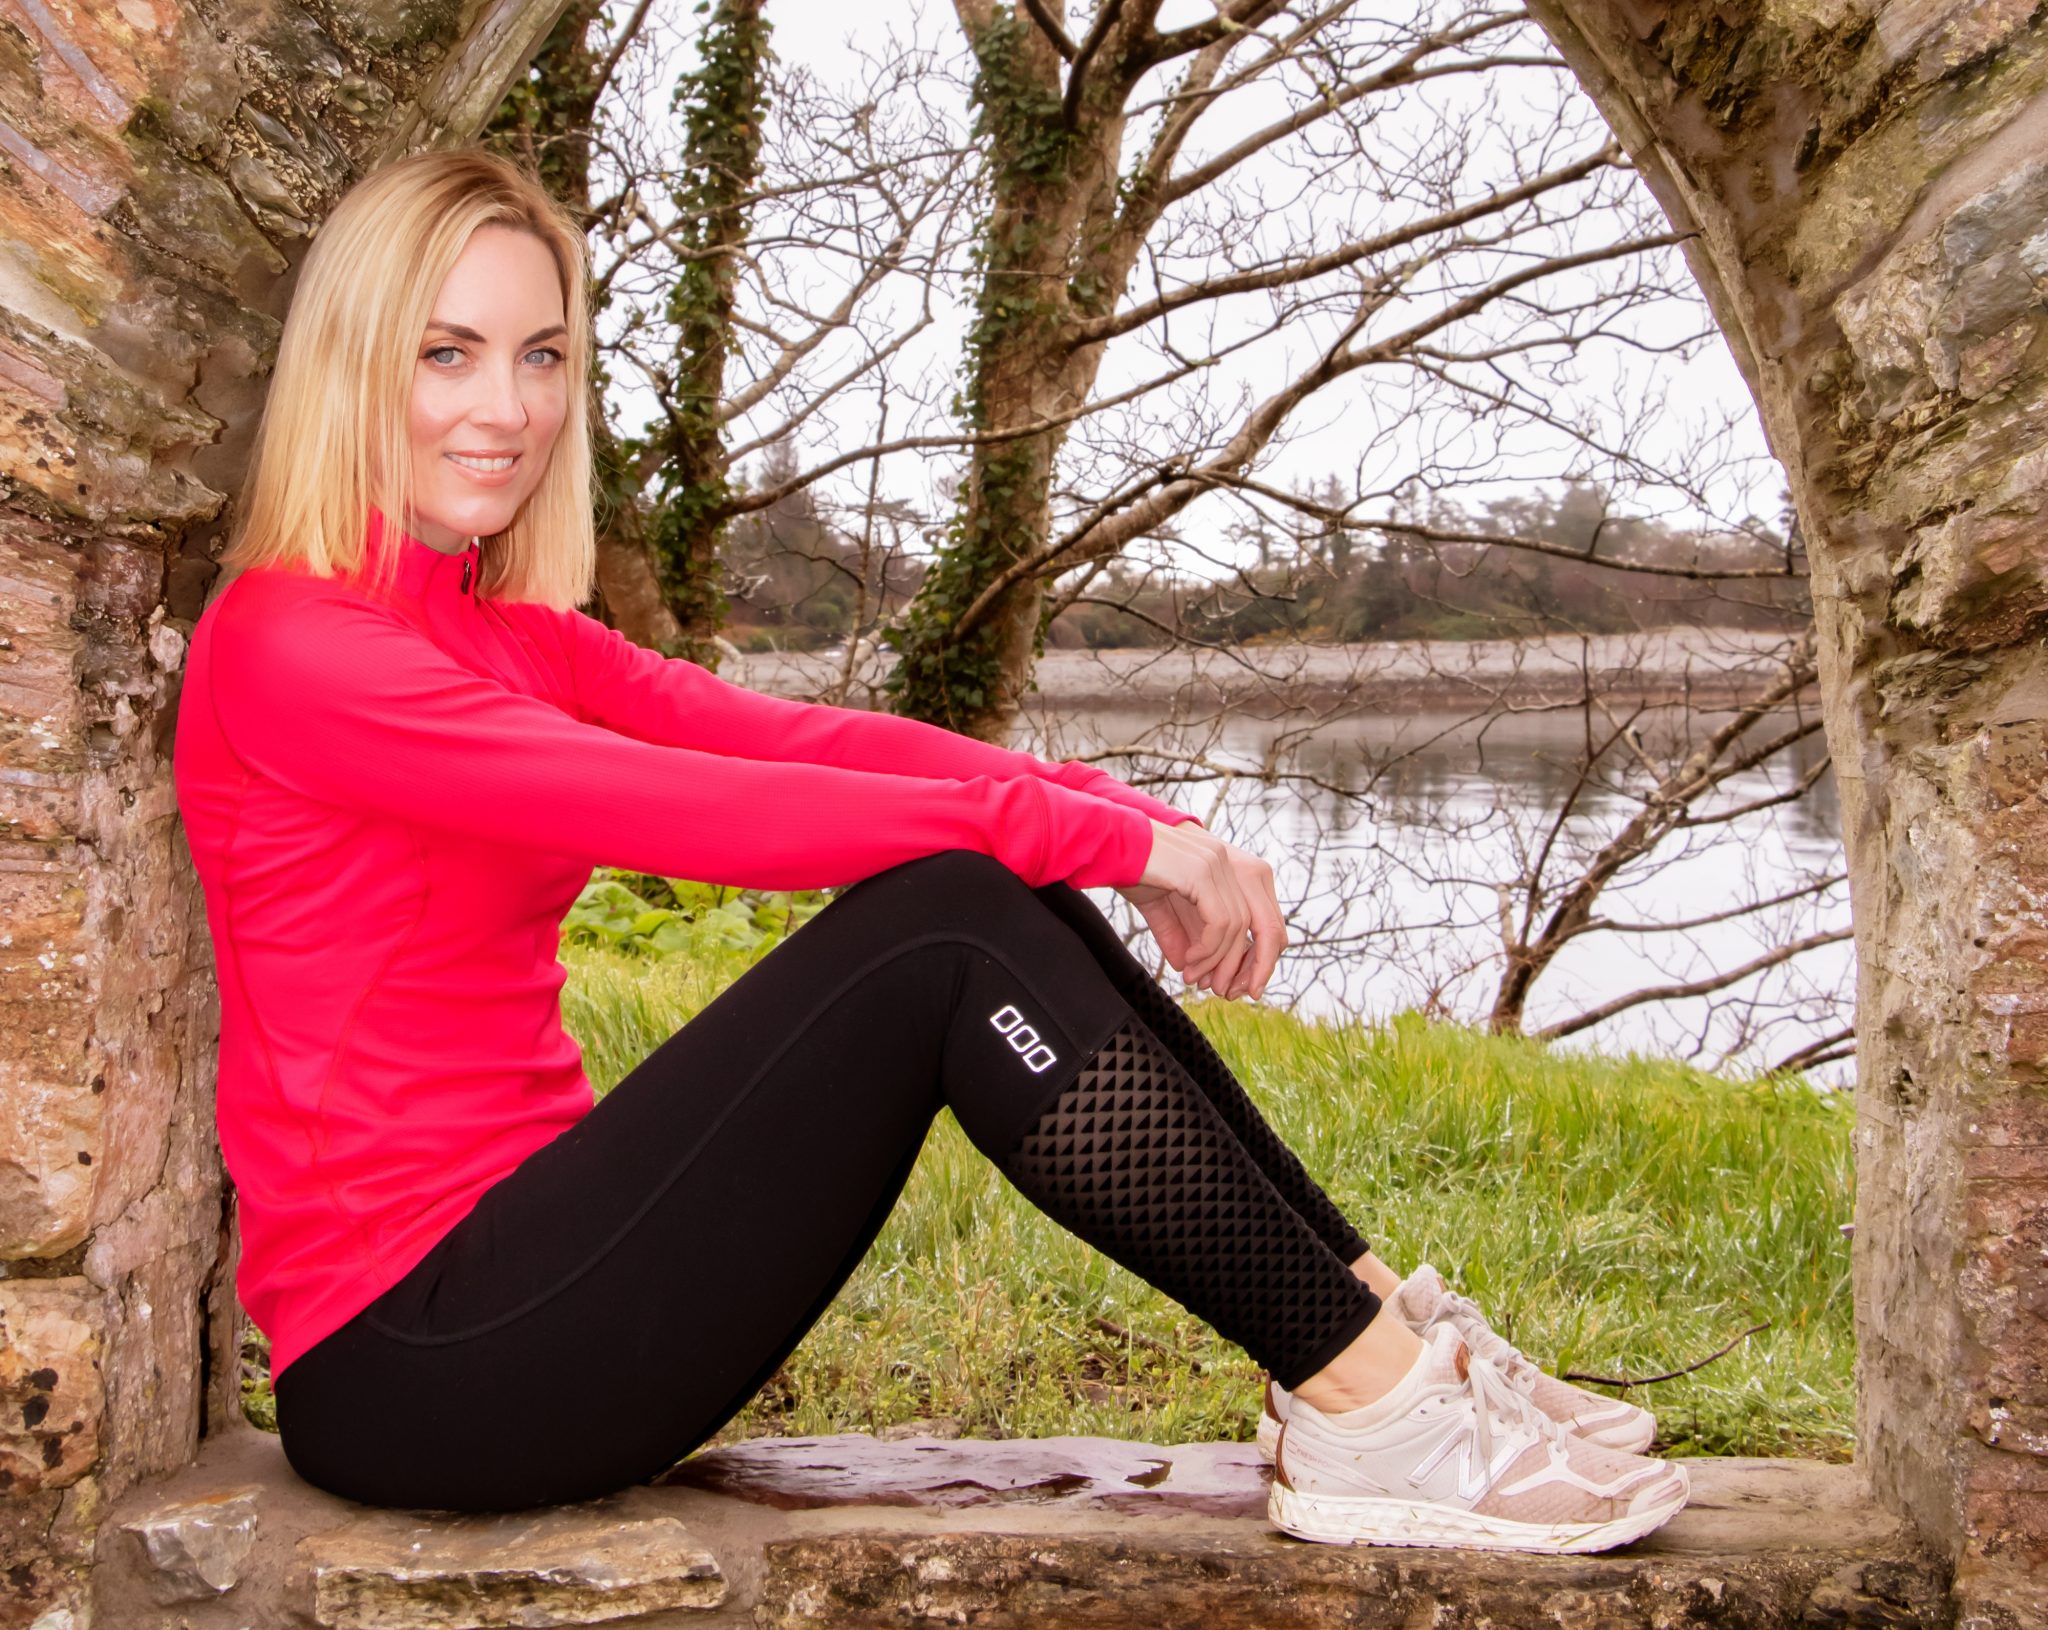 ‘You feeling your best will benefit everyone around you too’ Kathryn Thomas on keeping fit as a mum